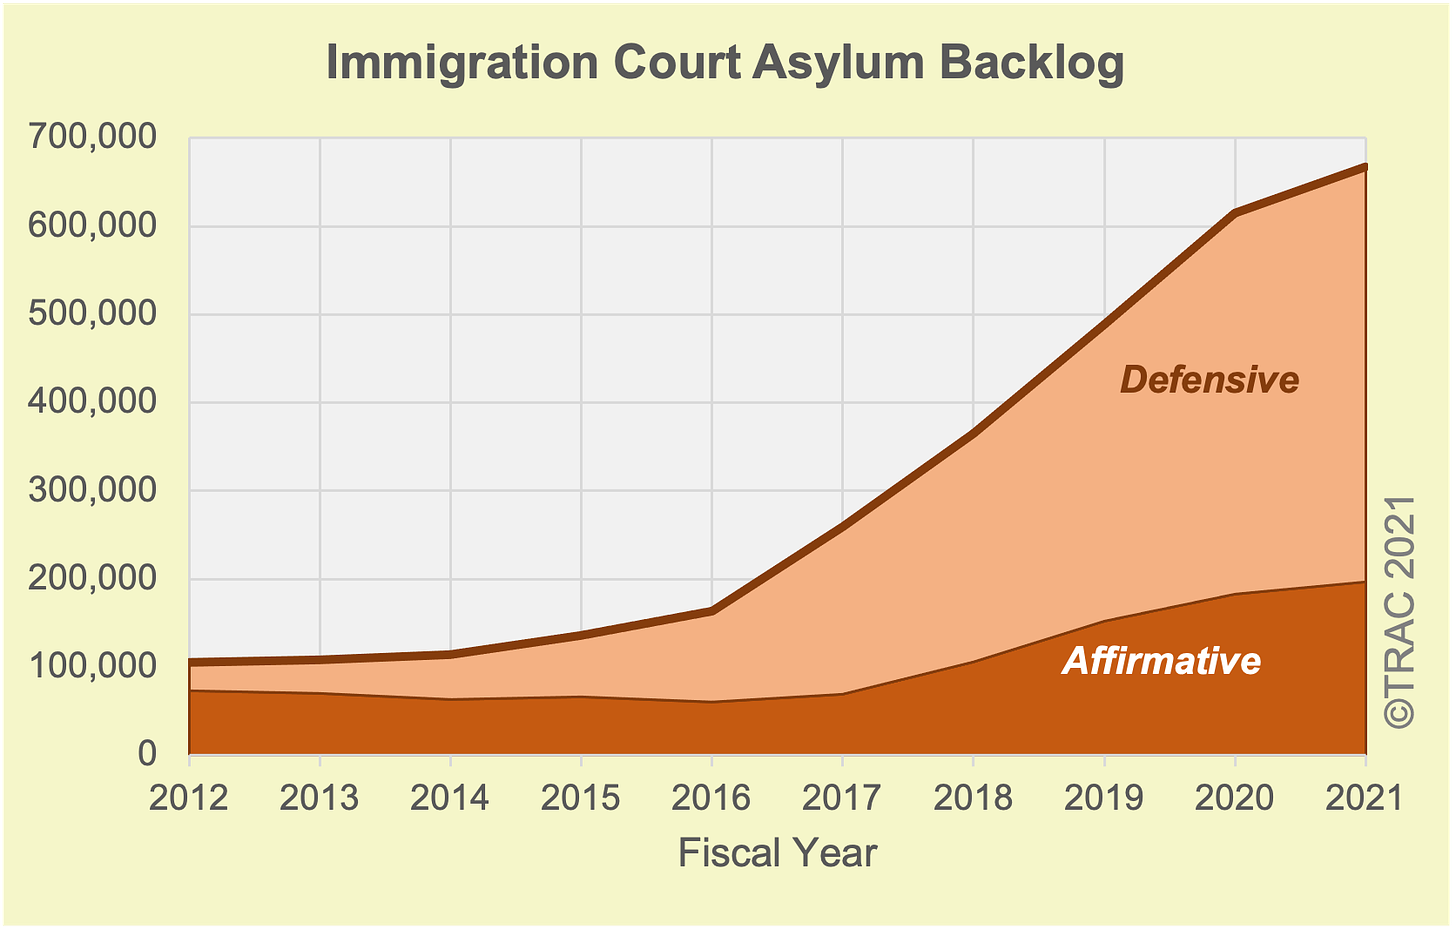 A Mounting Asylum Backlog and Growing Wait Times